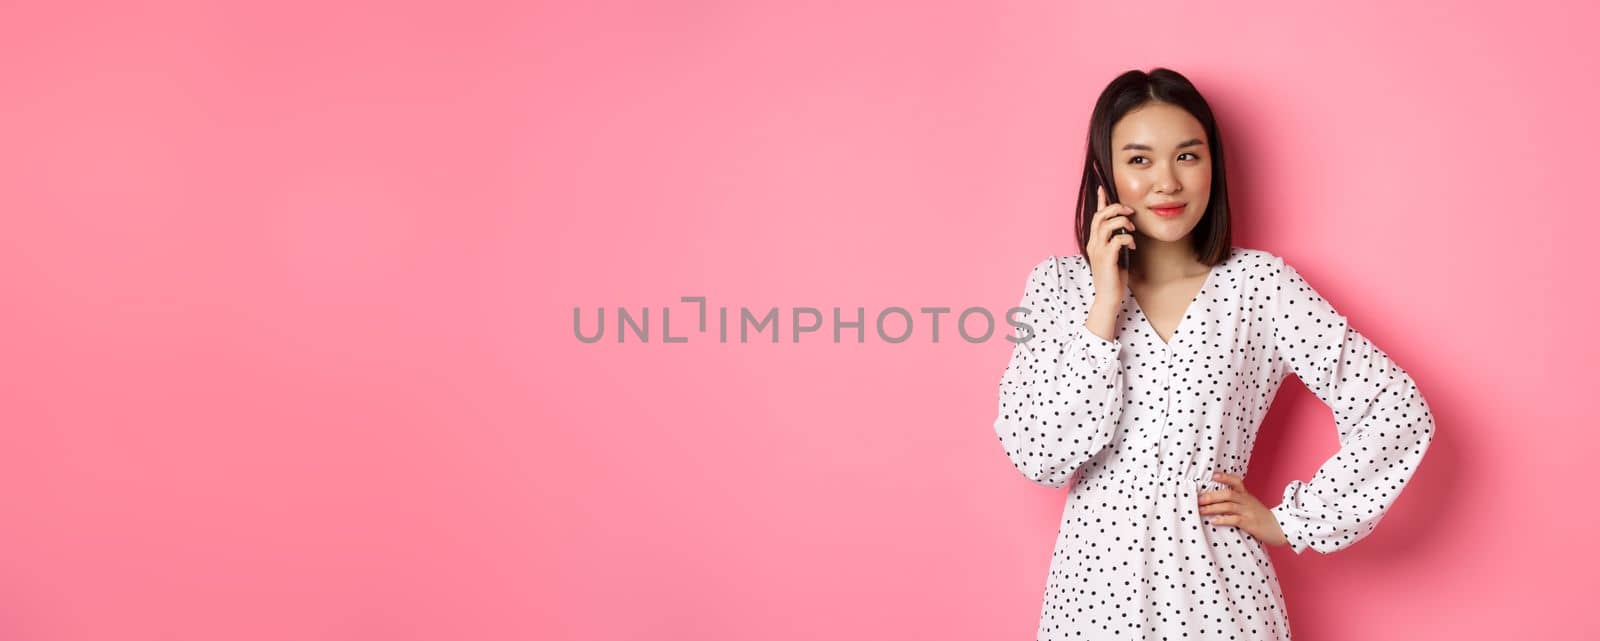 Attractive korean woman making a phone call, holding smartphone near ear and smiling, standing over pink background.